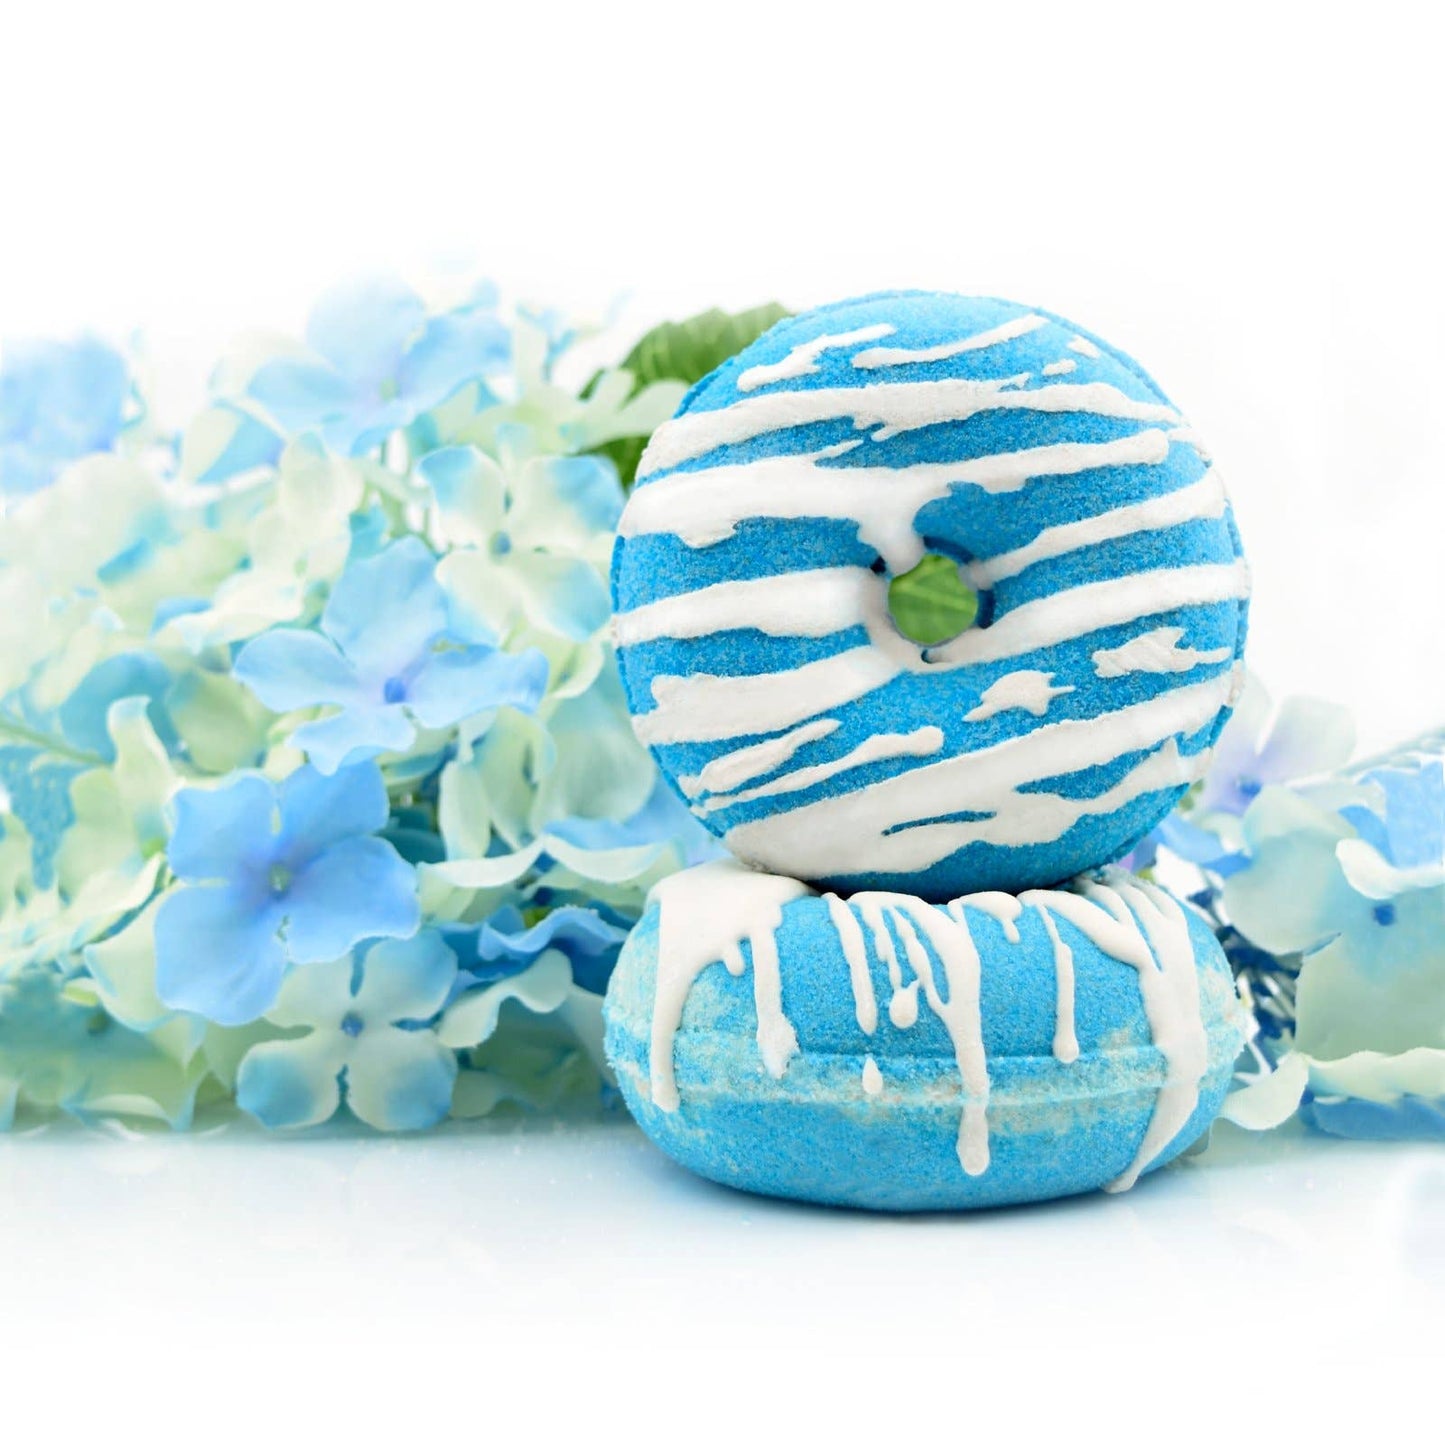 Body- Luxiny Blueberry Muffin Donut Shaped Bath Bomb